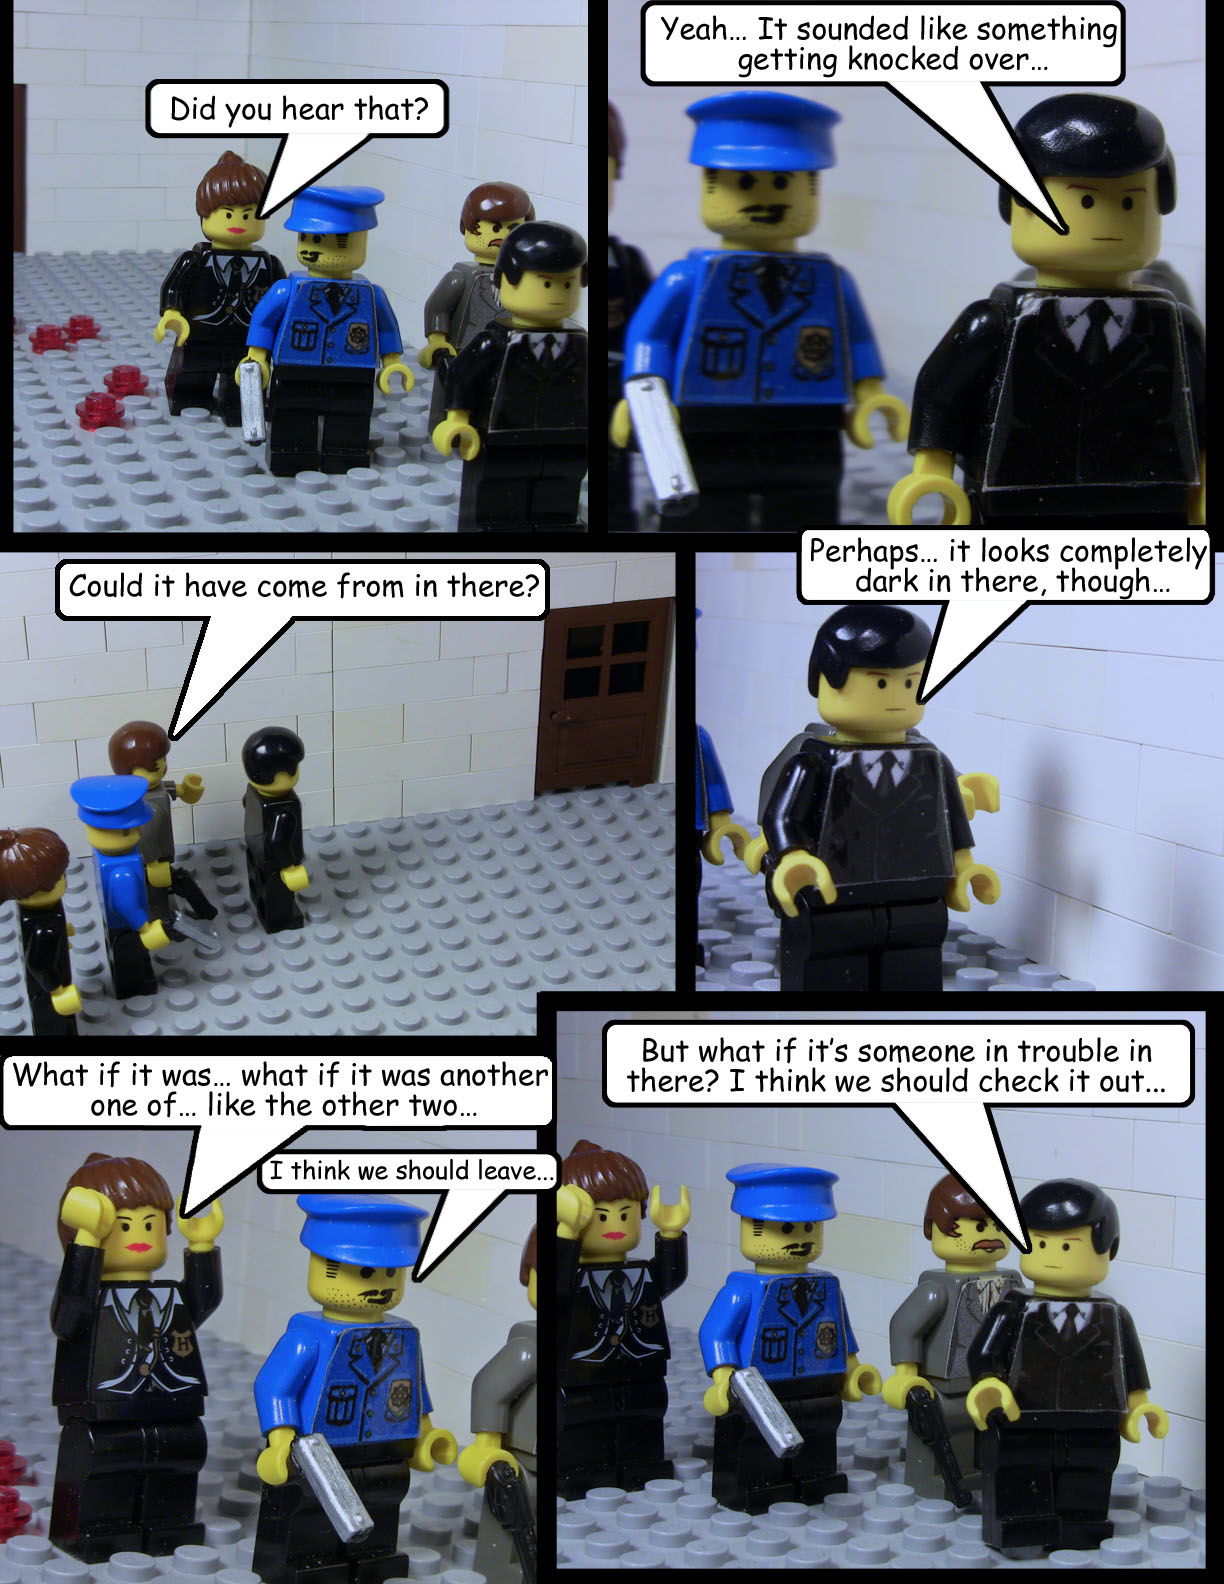 Zombie Outbrick: Episode 50